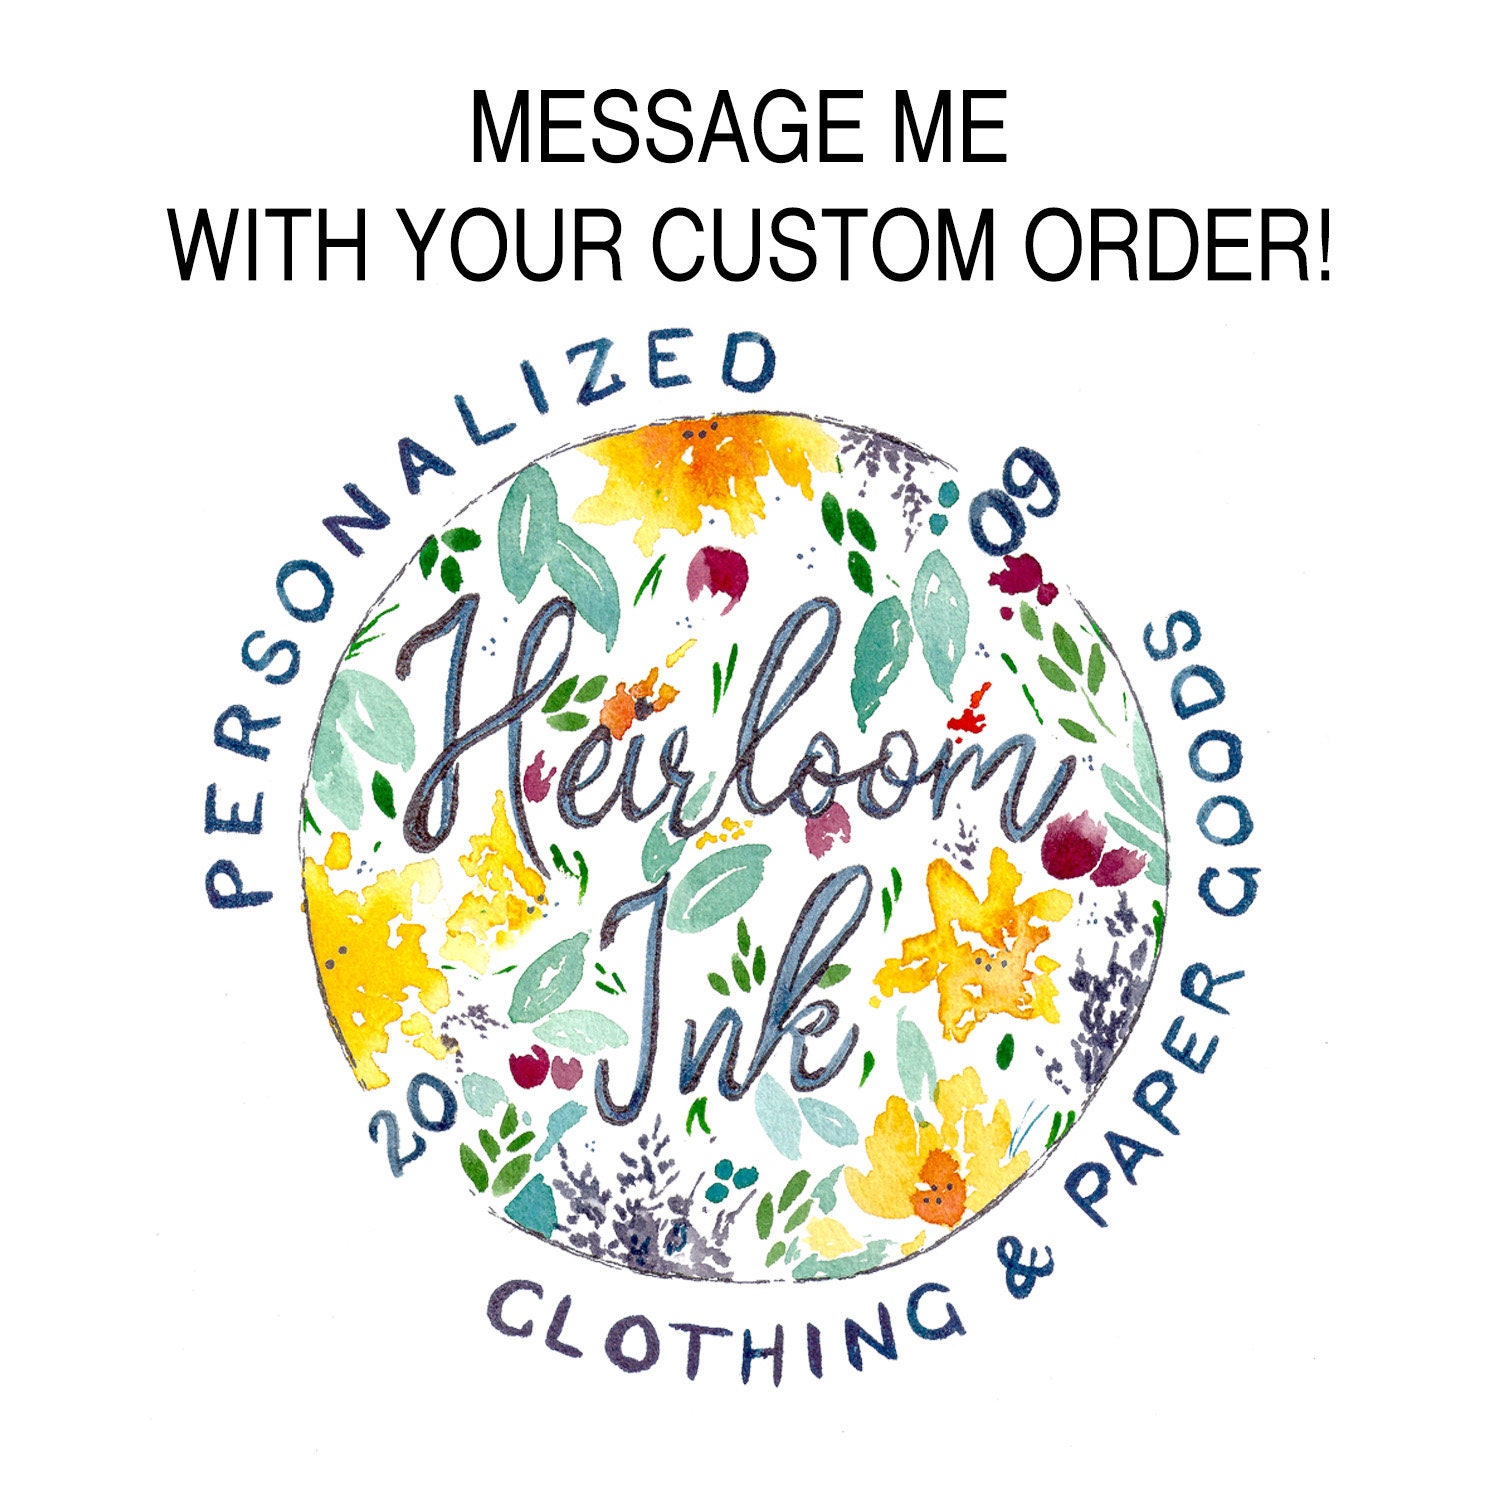 Nail Mail Stickers - Small Business Graphic by stacysdigitaldesigns ·  Creative Fabrica